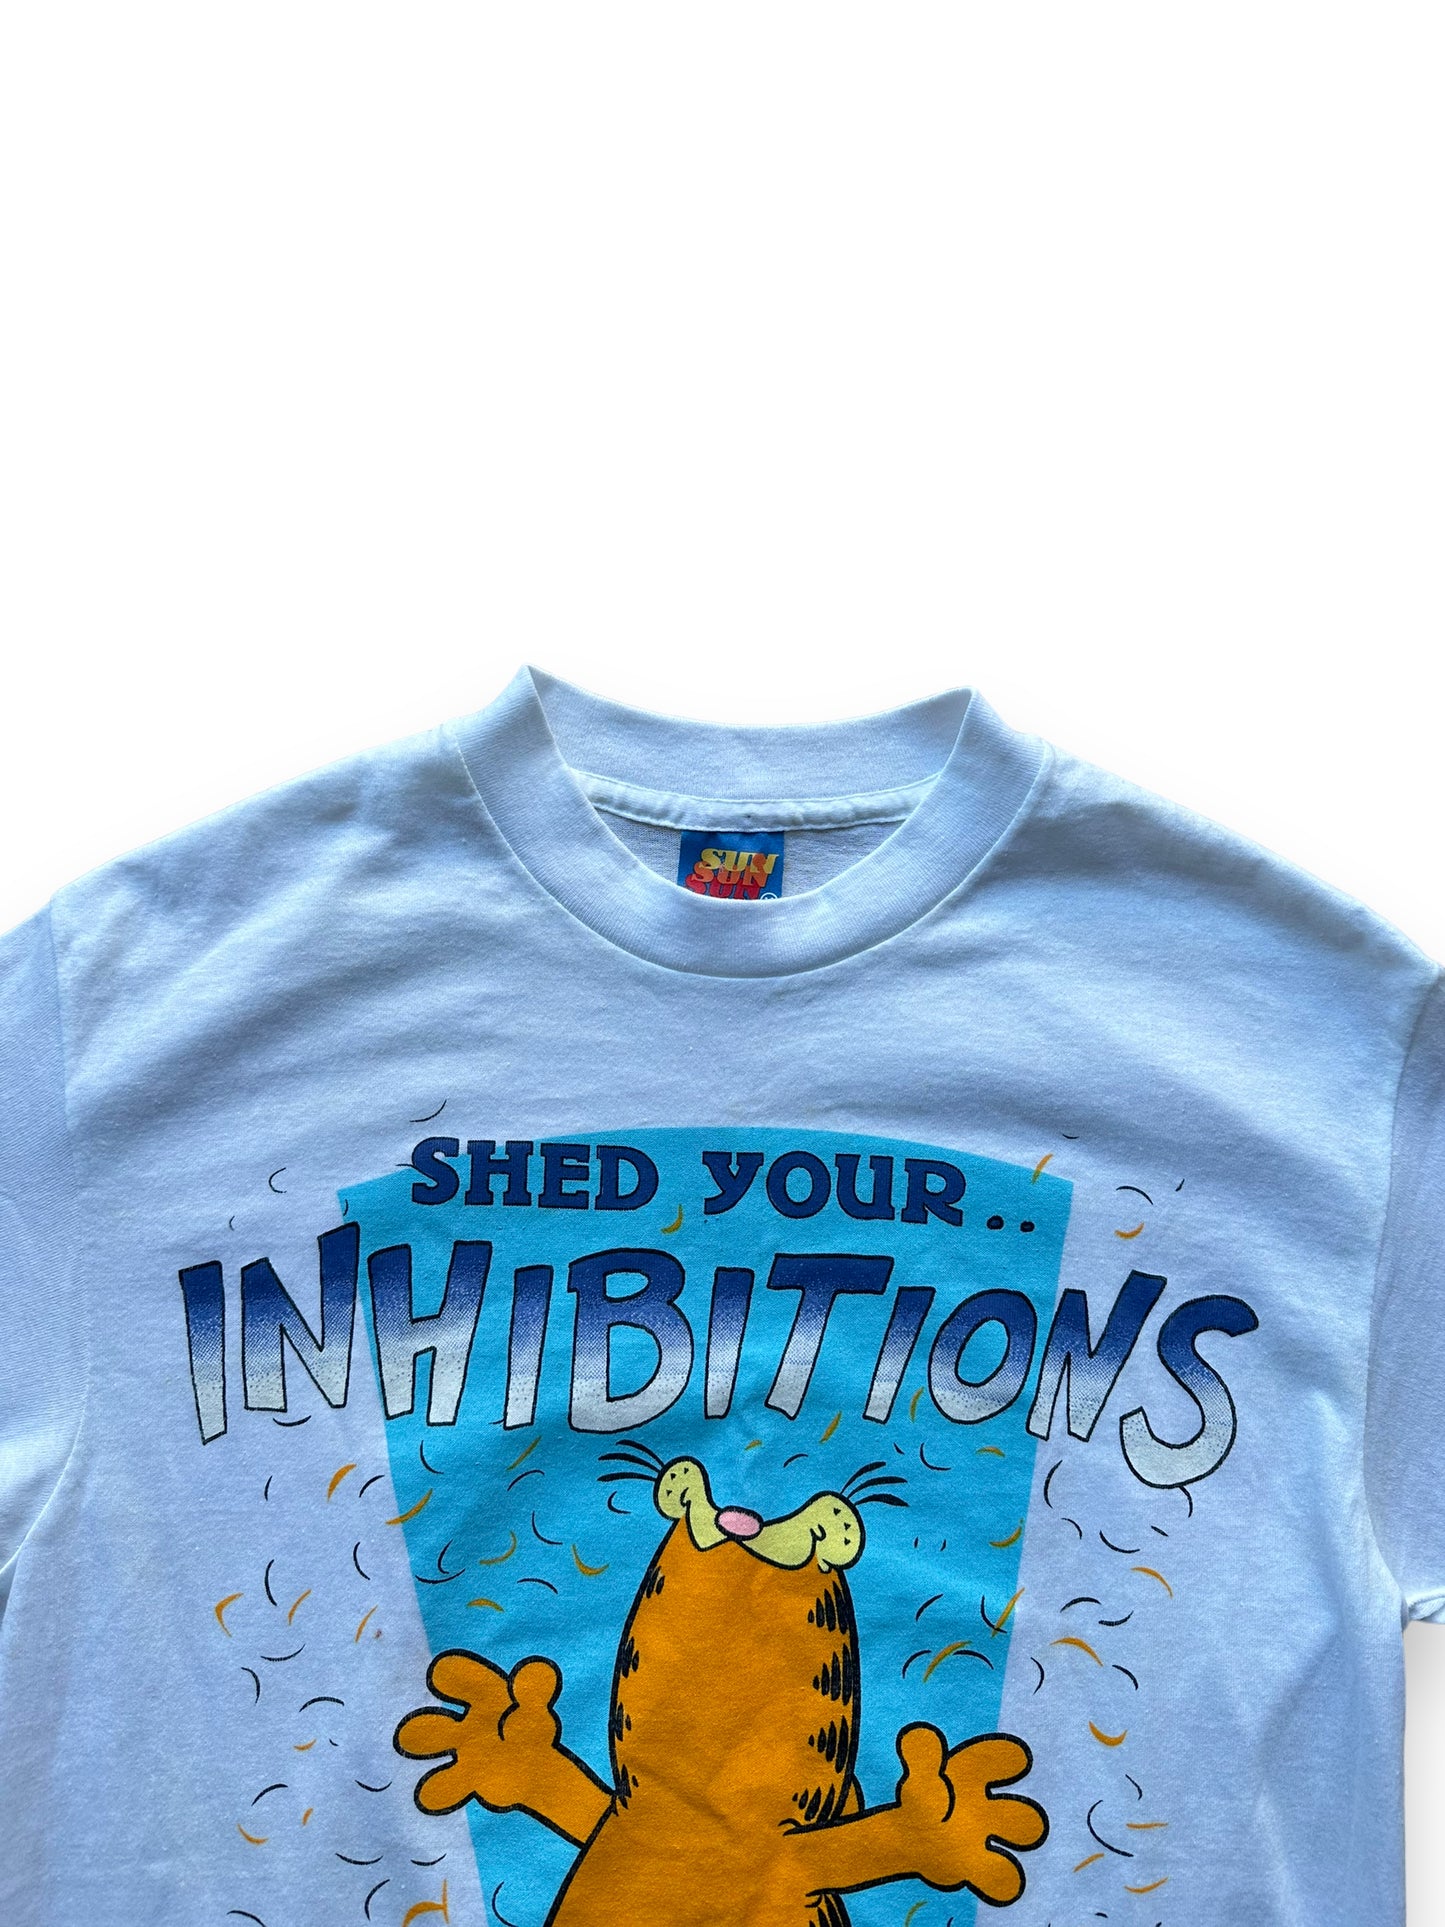 Vintage Garfield "Shed Your Inhibitions" Tee SZ M |  Vintage Cat Tee Seattle | Barn Owl Vintage